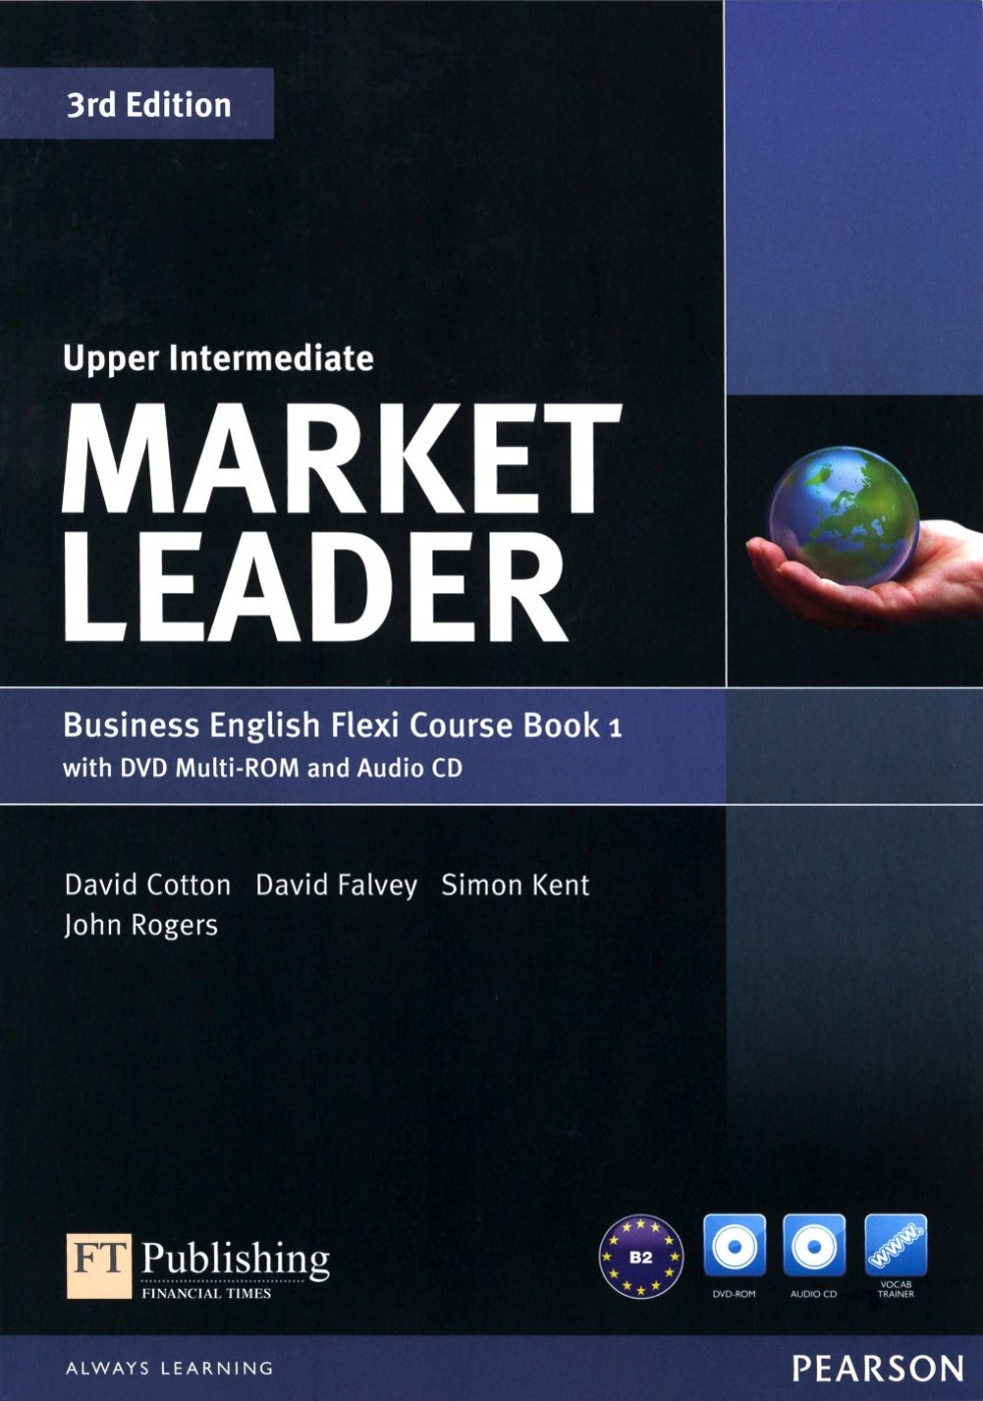 Market Leader 3/e (Upp-Int) Flexi Course Book 1 with DVD-ROM/1片 and Audio CD/1片